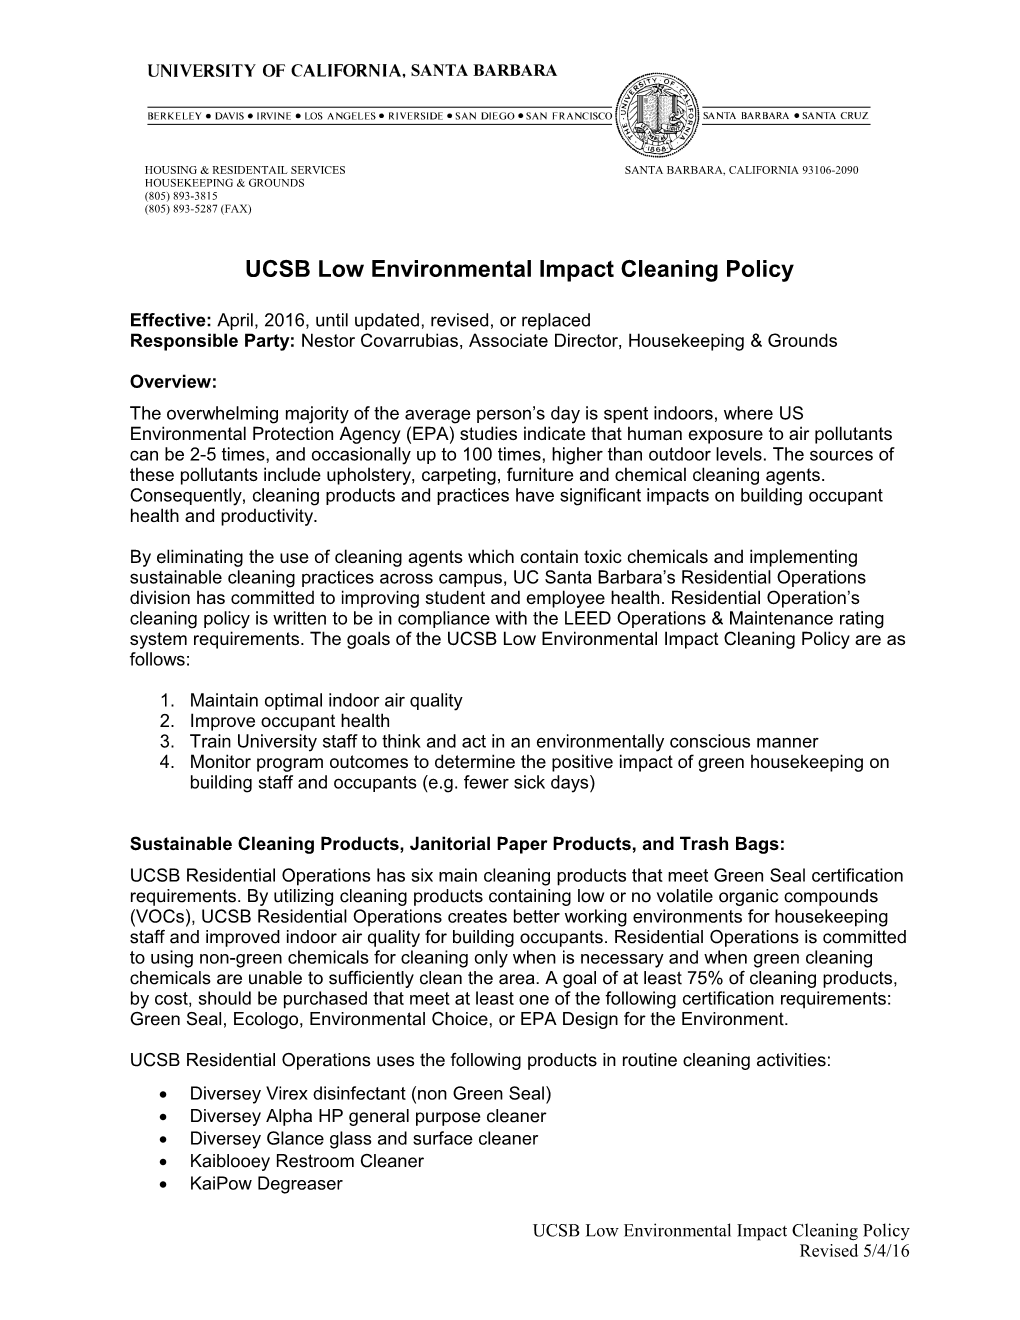 UCSB Low Environmental Impact Cleaning Policy